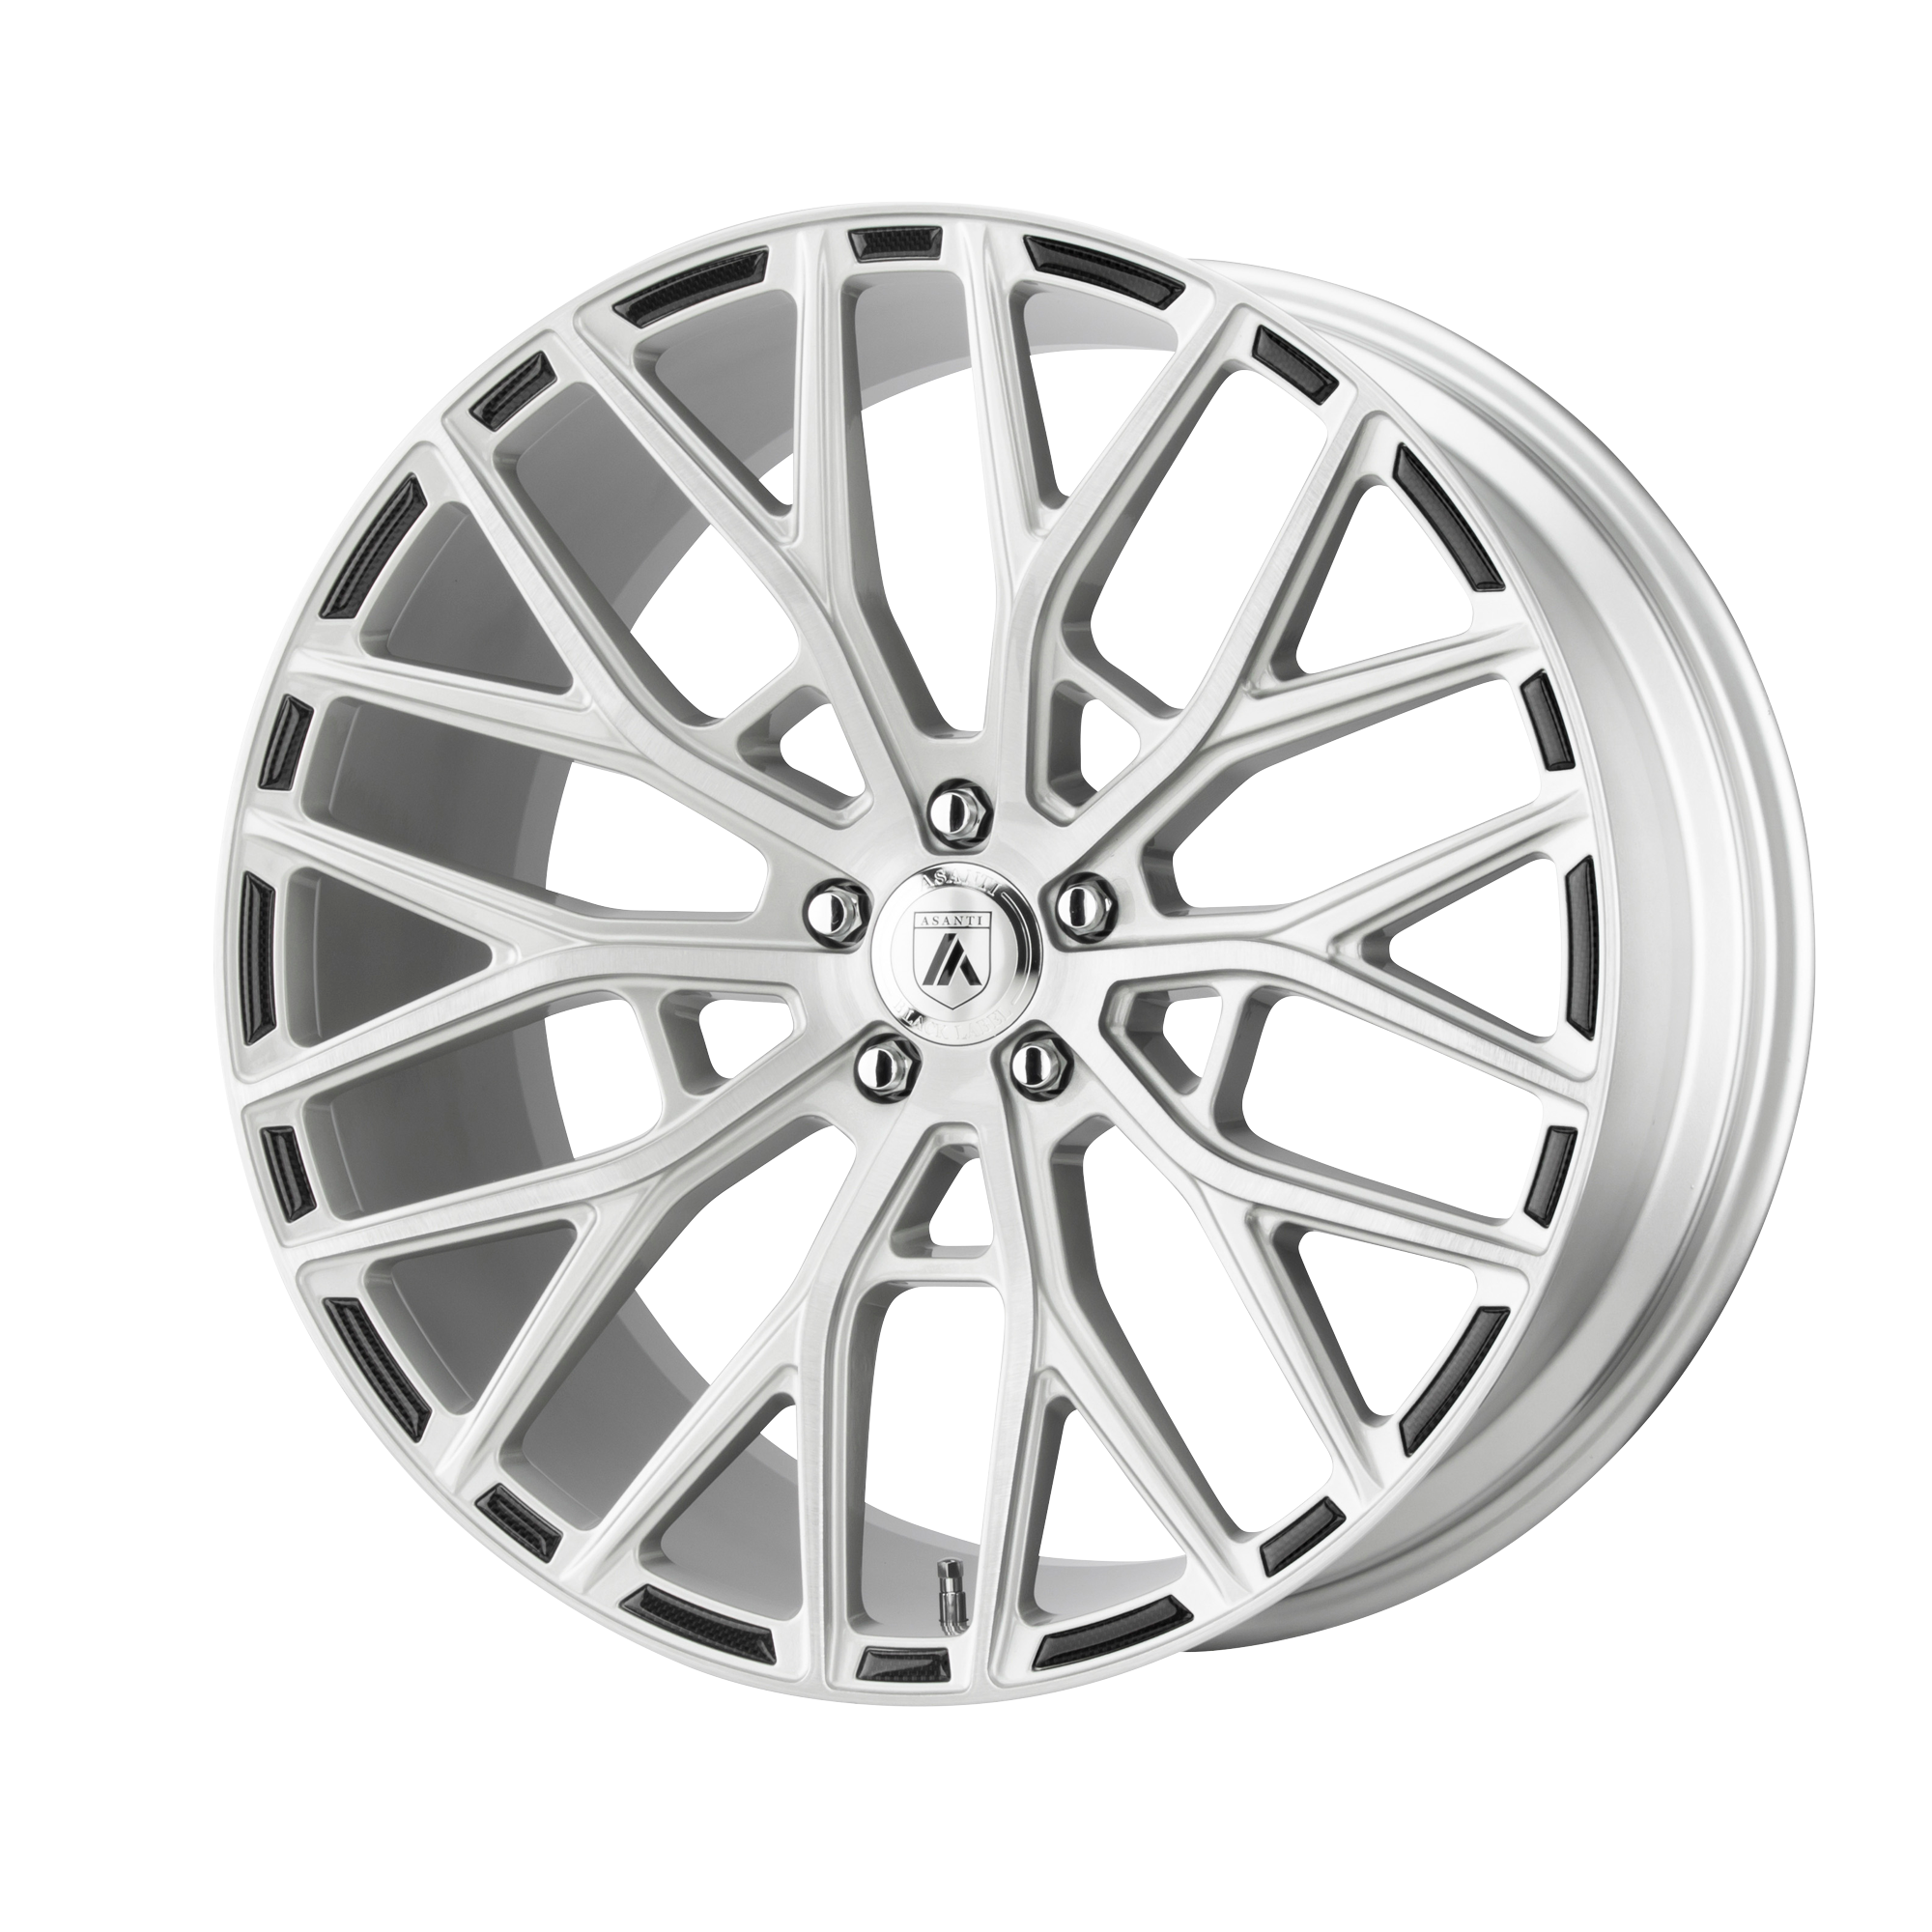 LEO 20x8.5 5x112.00 BRUSHED SILVER (38 mm) - Tires and Engine Performance